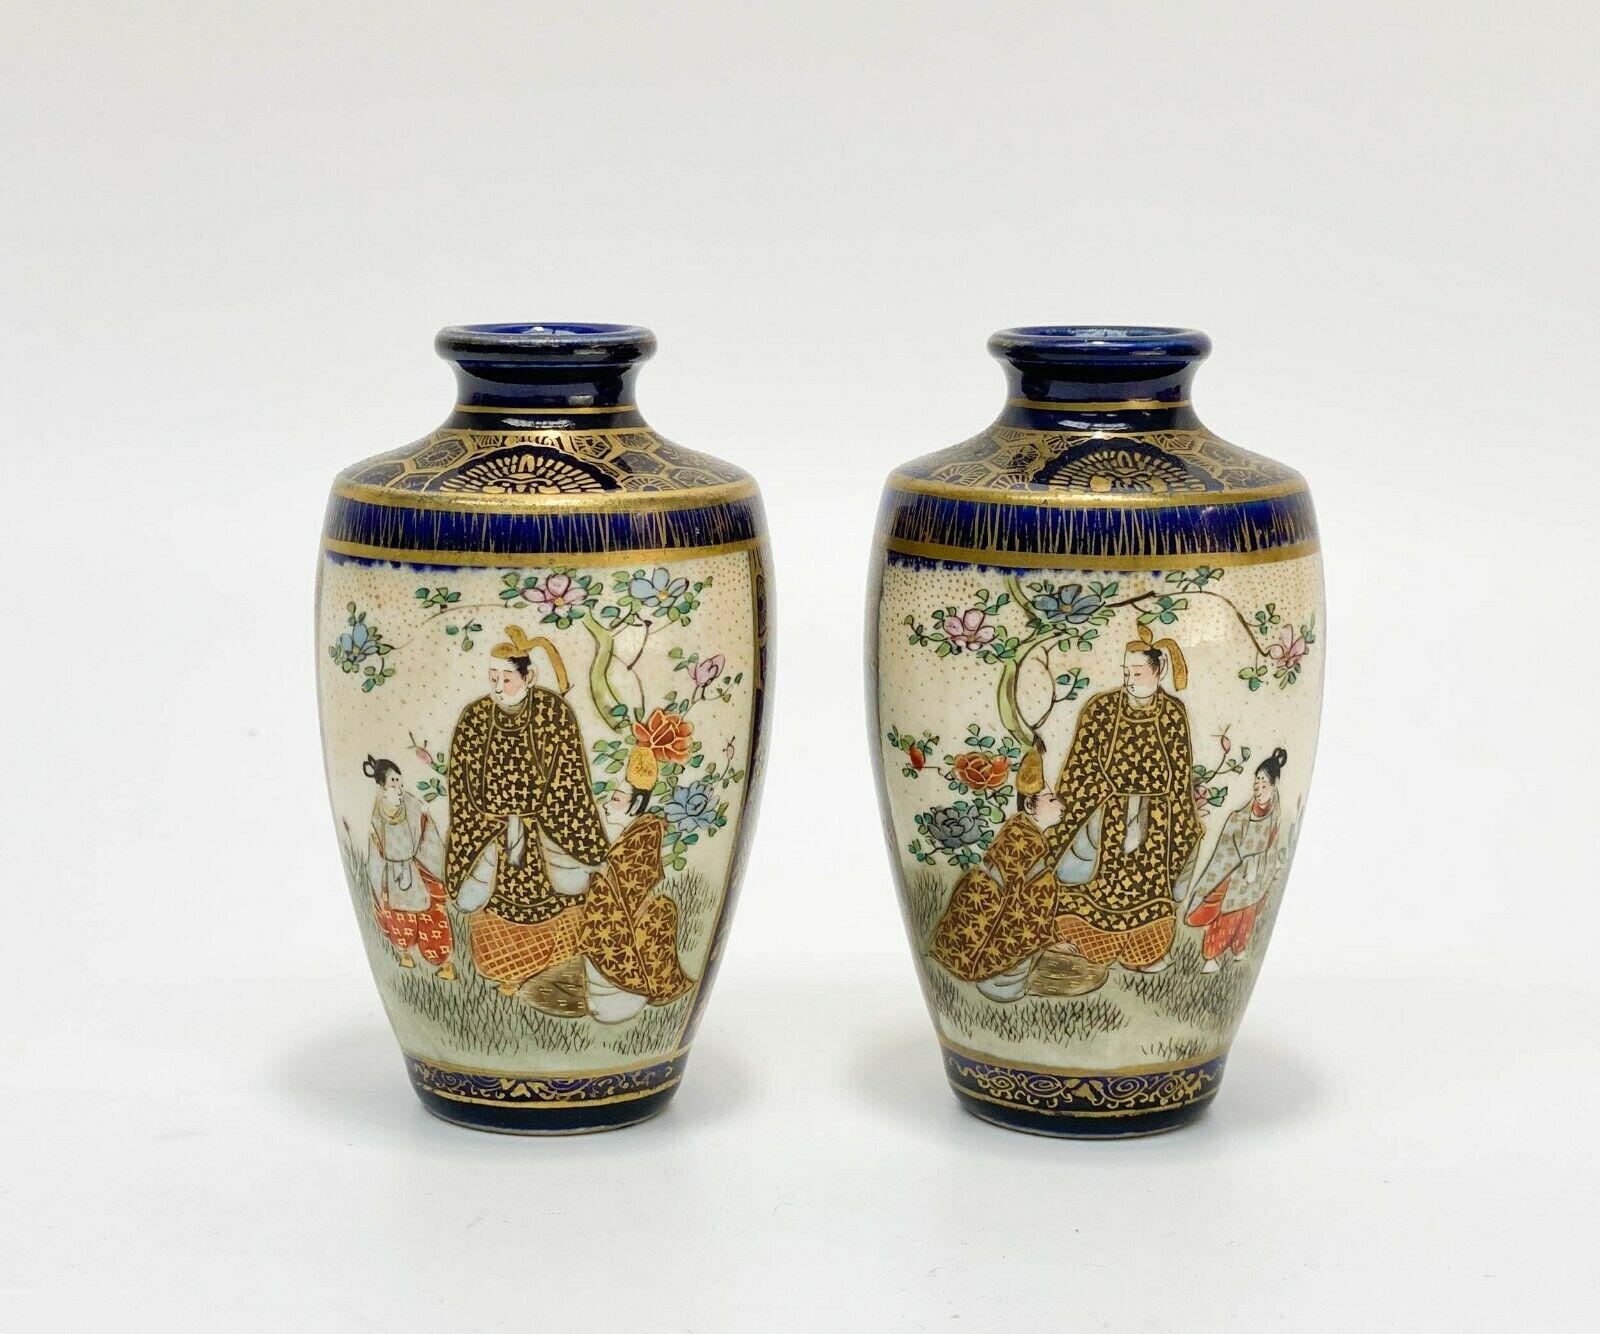 Pair of Japanese Satsuma hand painted porcelain miniature vases, Meiji Period

Cobalt blue ground with geometric and floral gilt decoration. Hand painted images of figures in traditional kimono in indoor and outdoor scenes with raised enamel